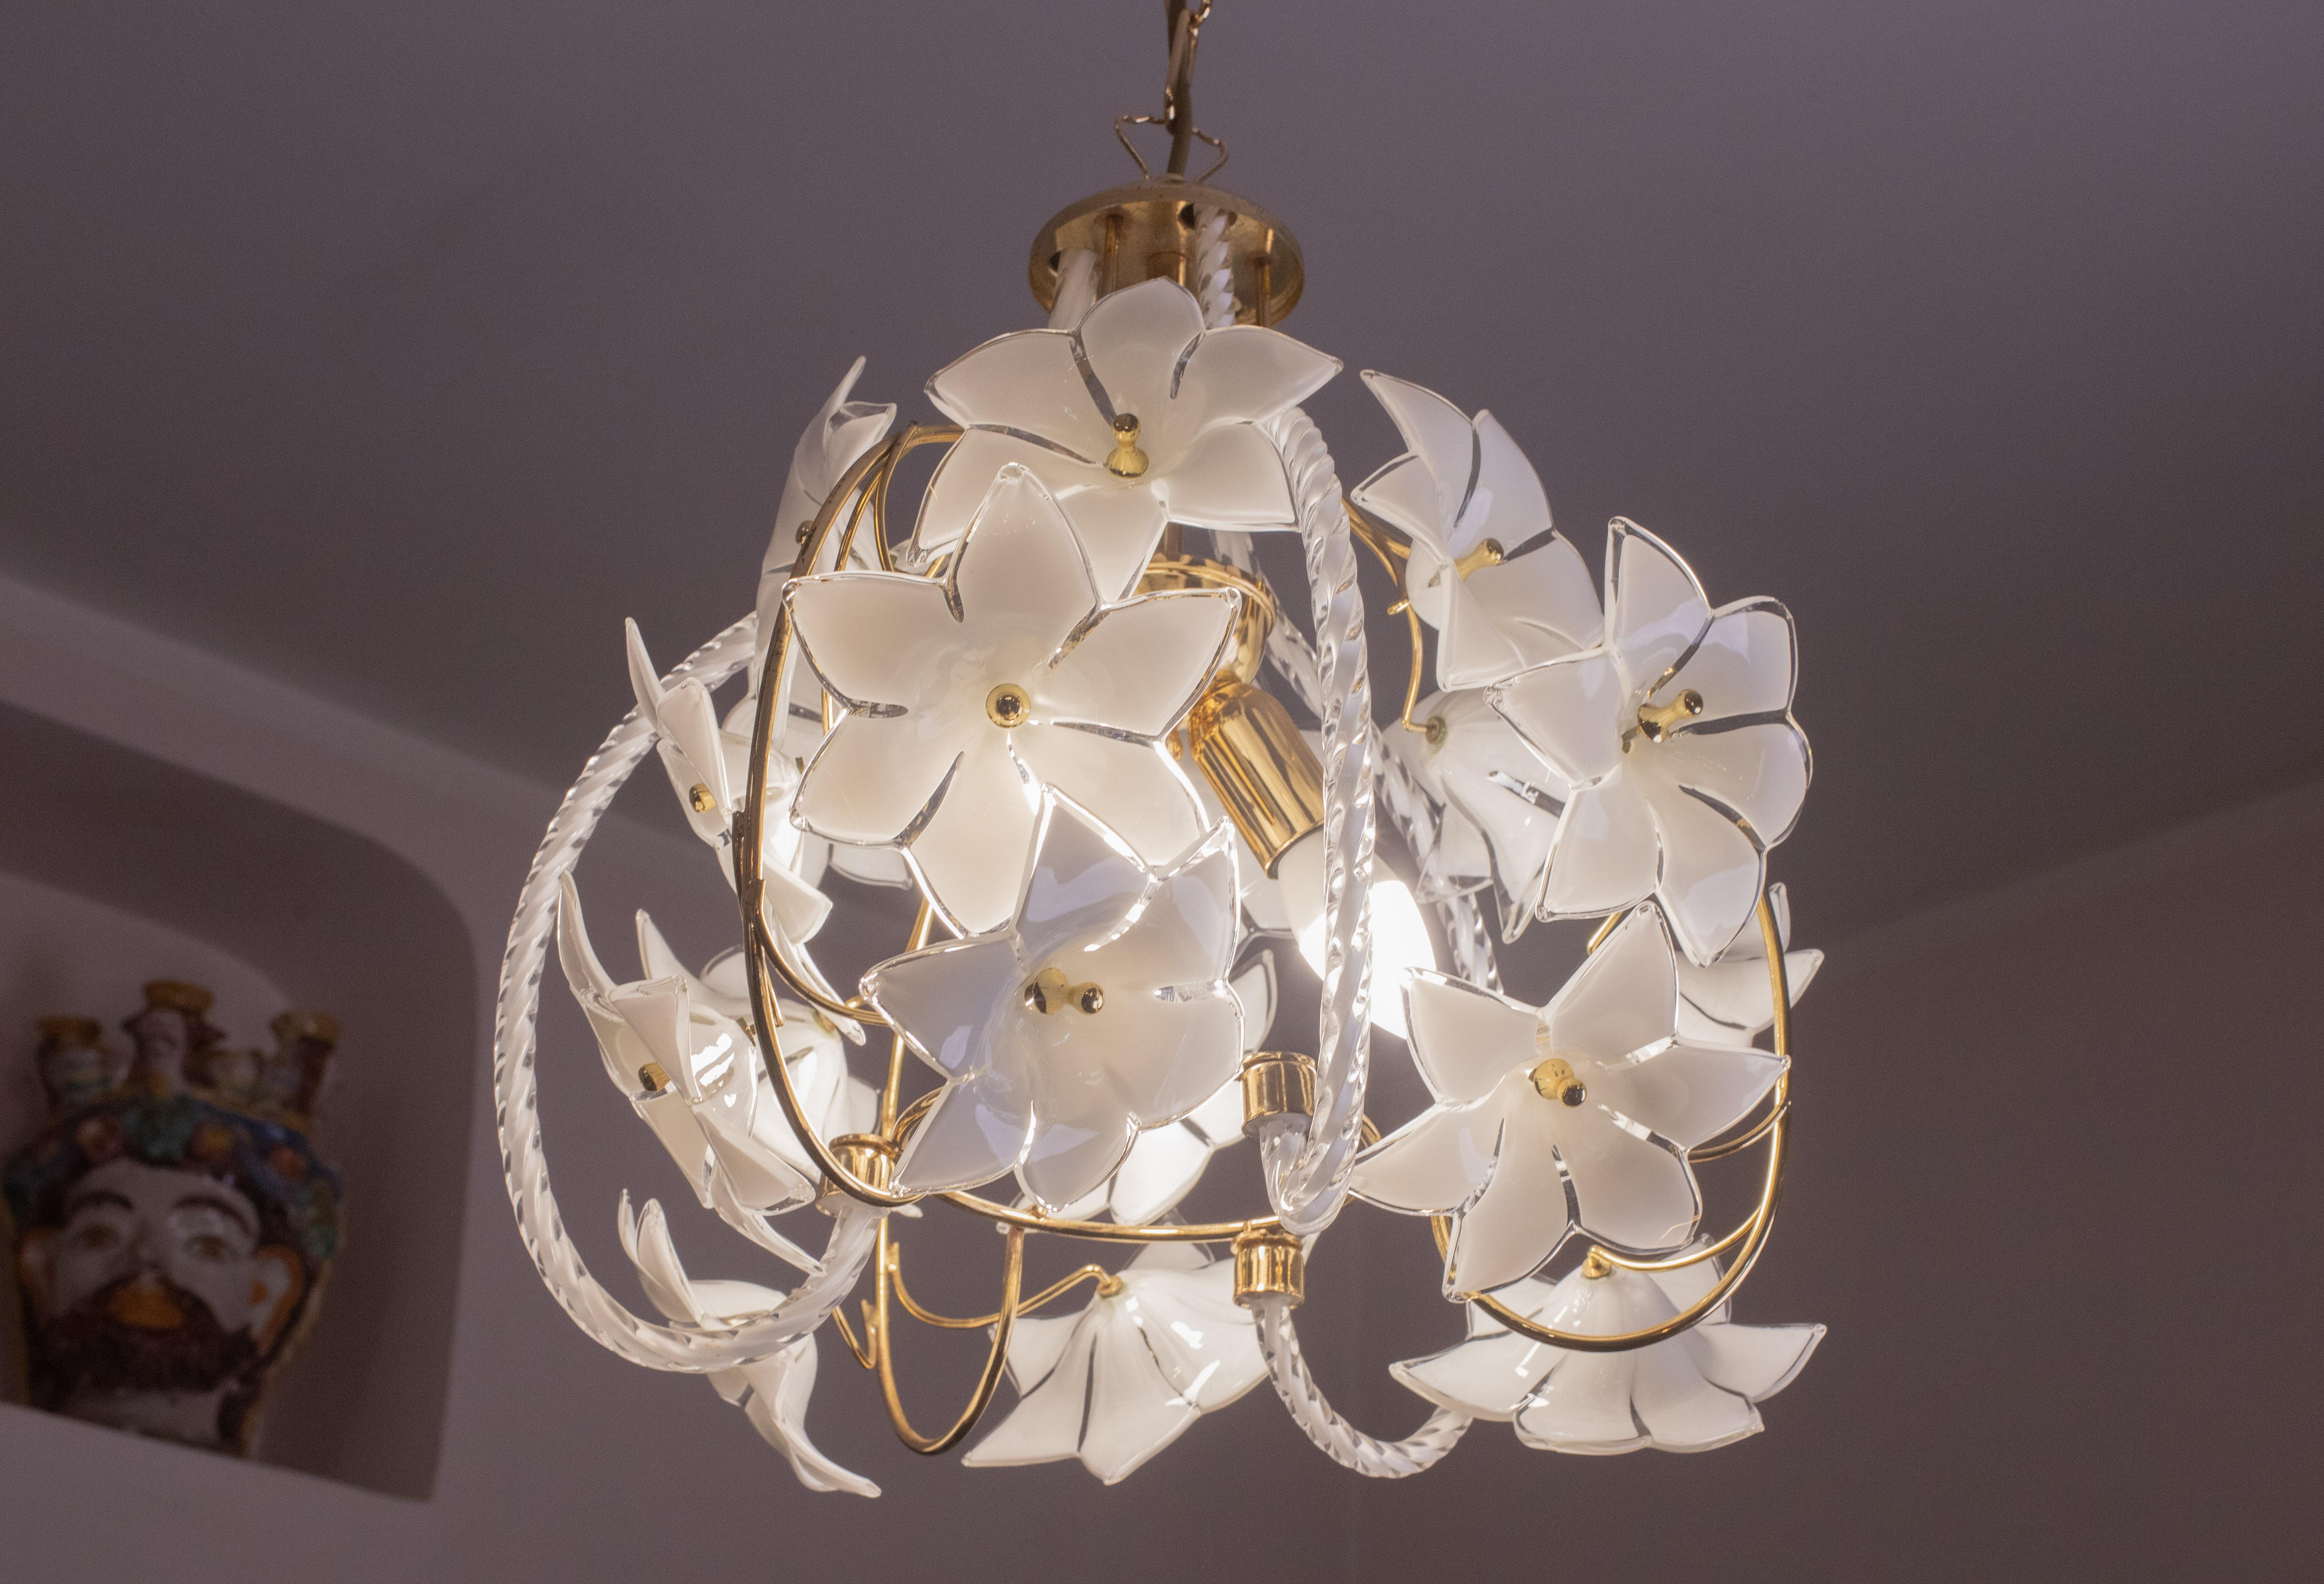 Vintage Murano glass chandelier filled with white flowers.
The structure of the chandelier is circular and has three beautiful glass elements around the circumference.
The chandelier has 3 light points with E14 socket.
The frame is in gold bath, in